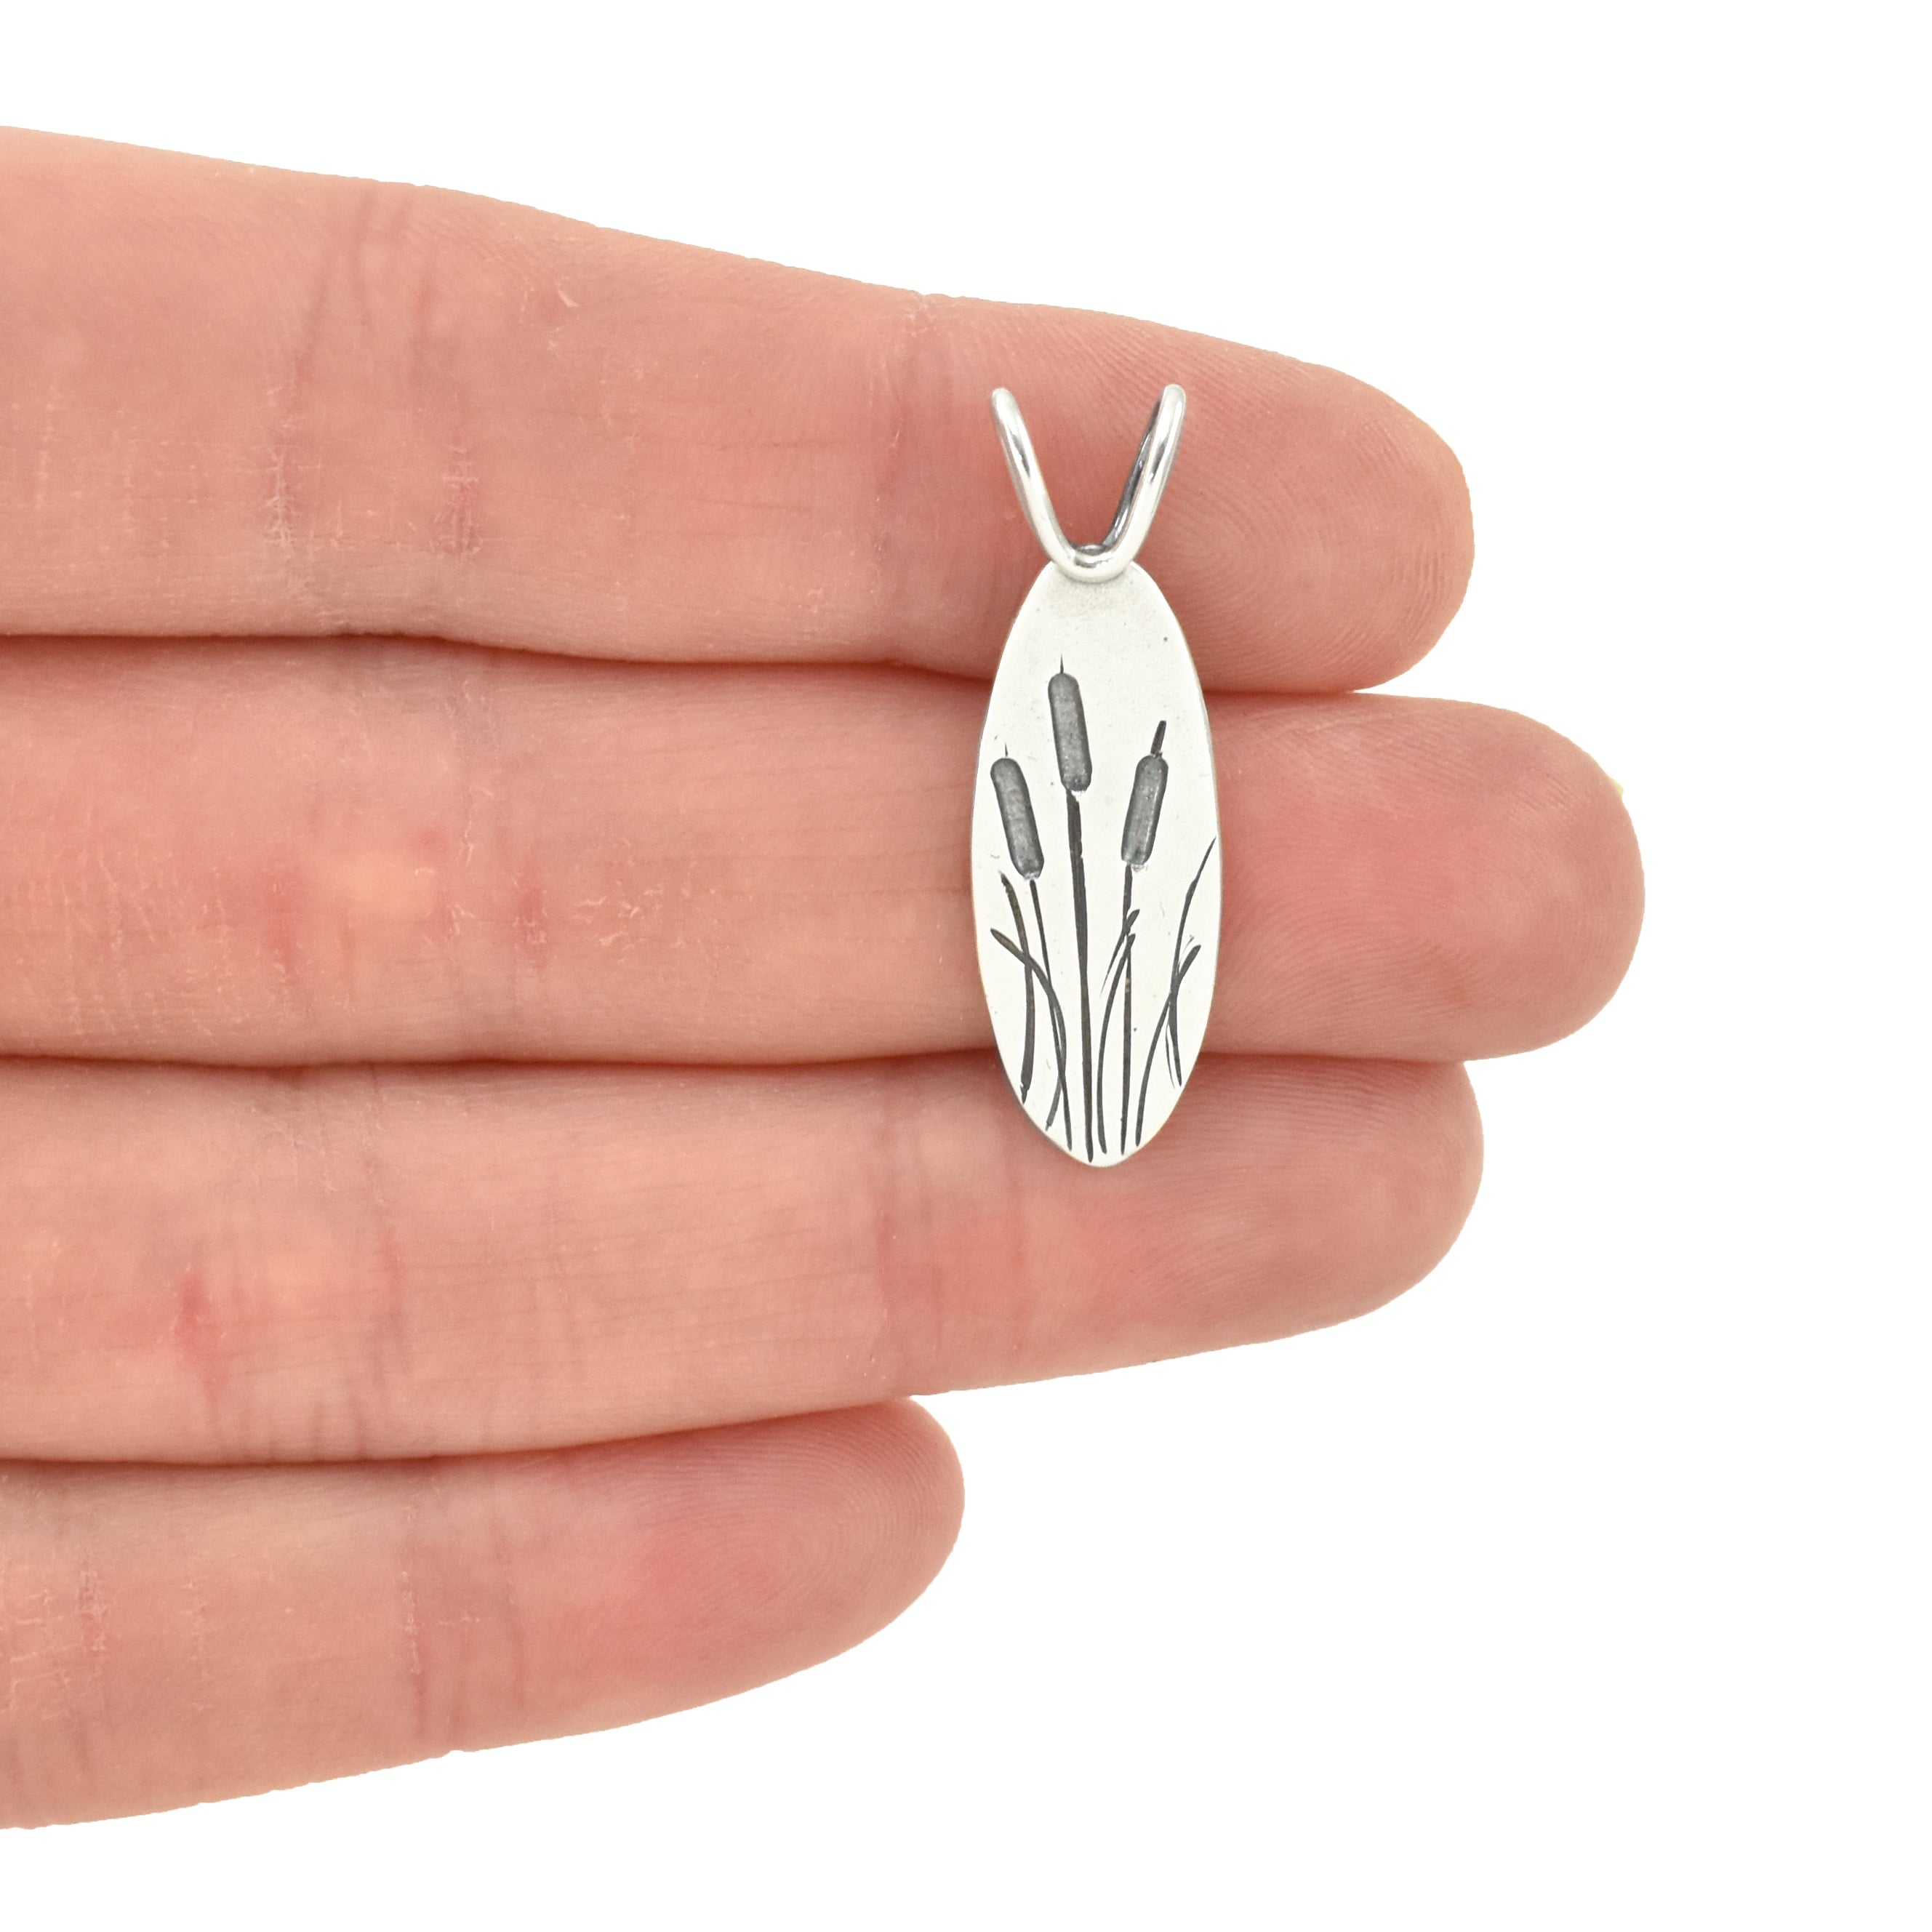 Cattails Pendant - Silver Pendant   6875 - handmade by Beth Millner Jewelry